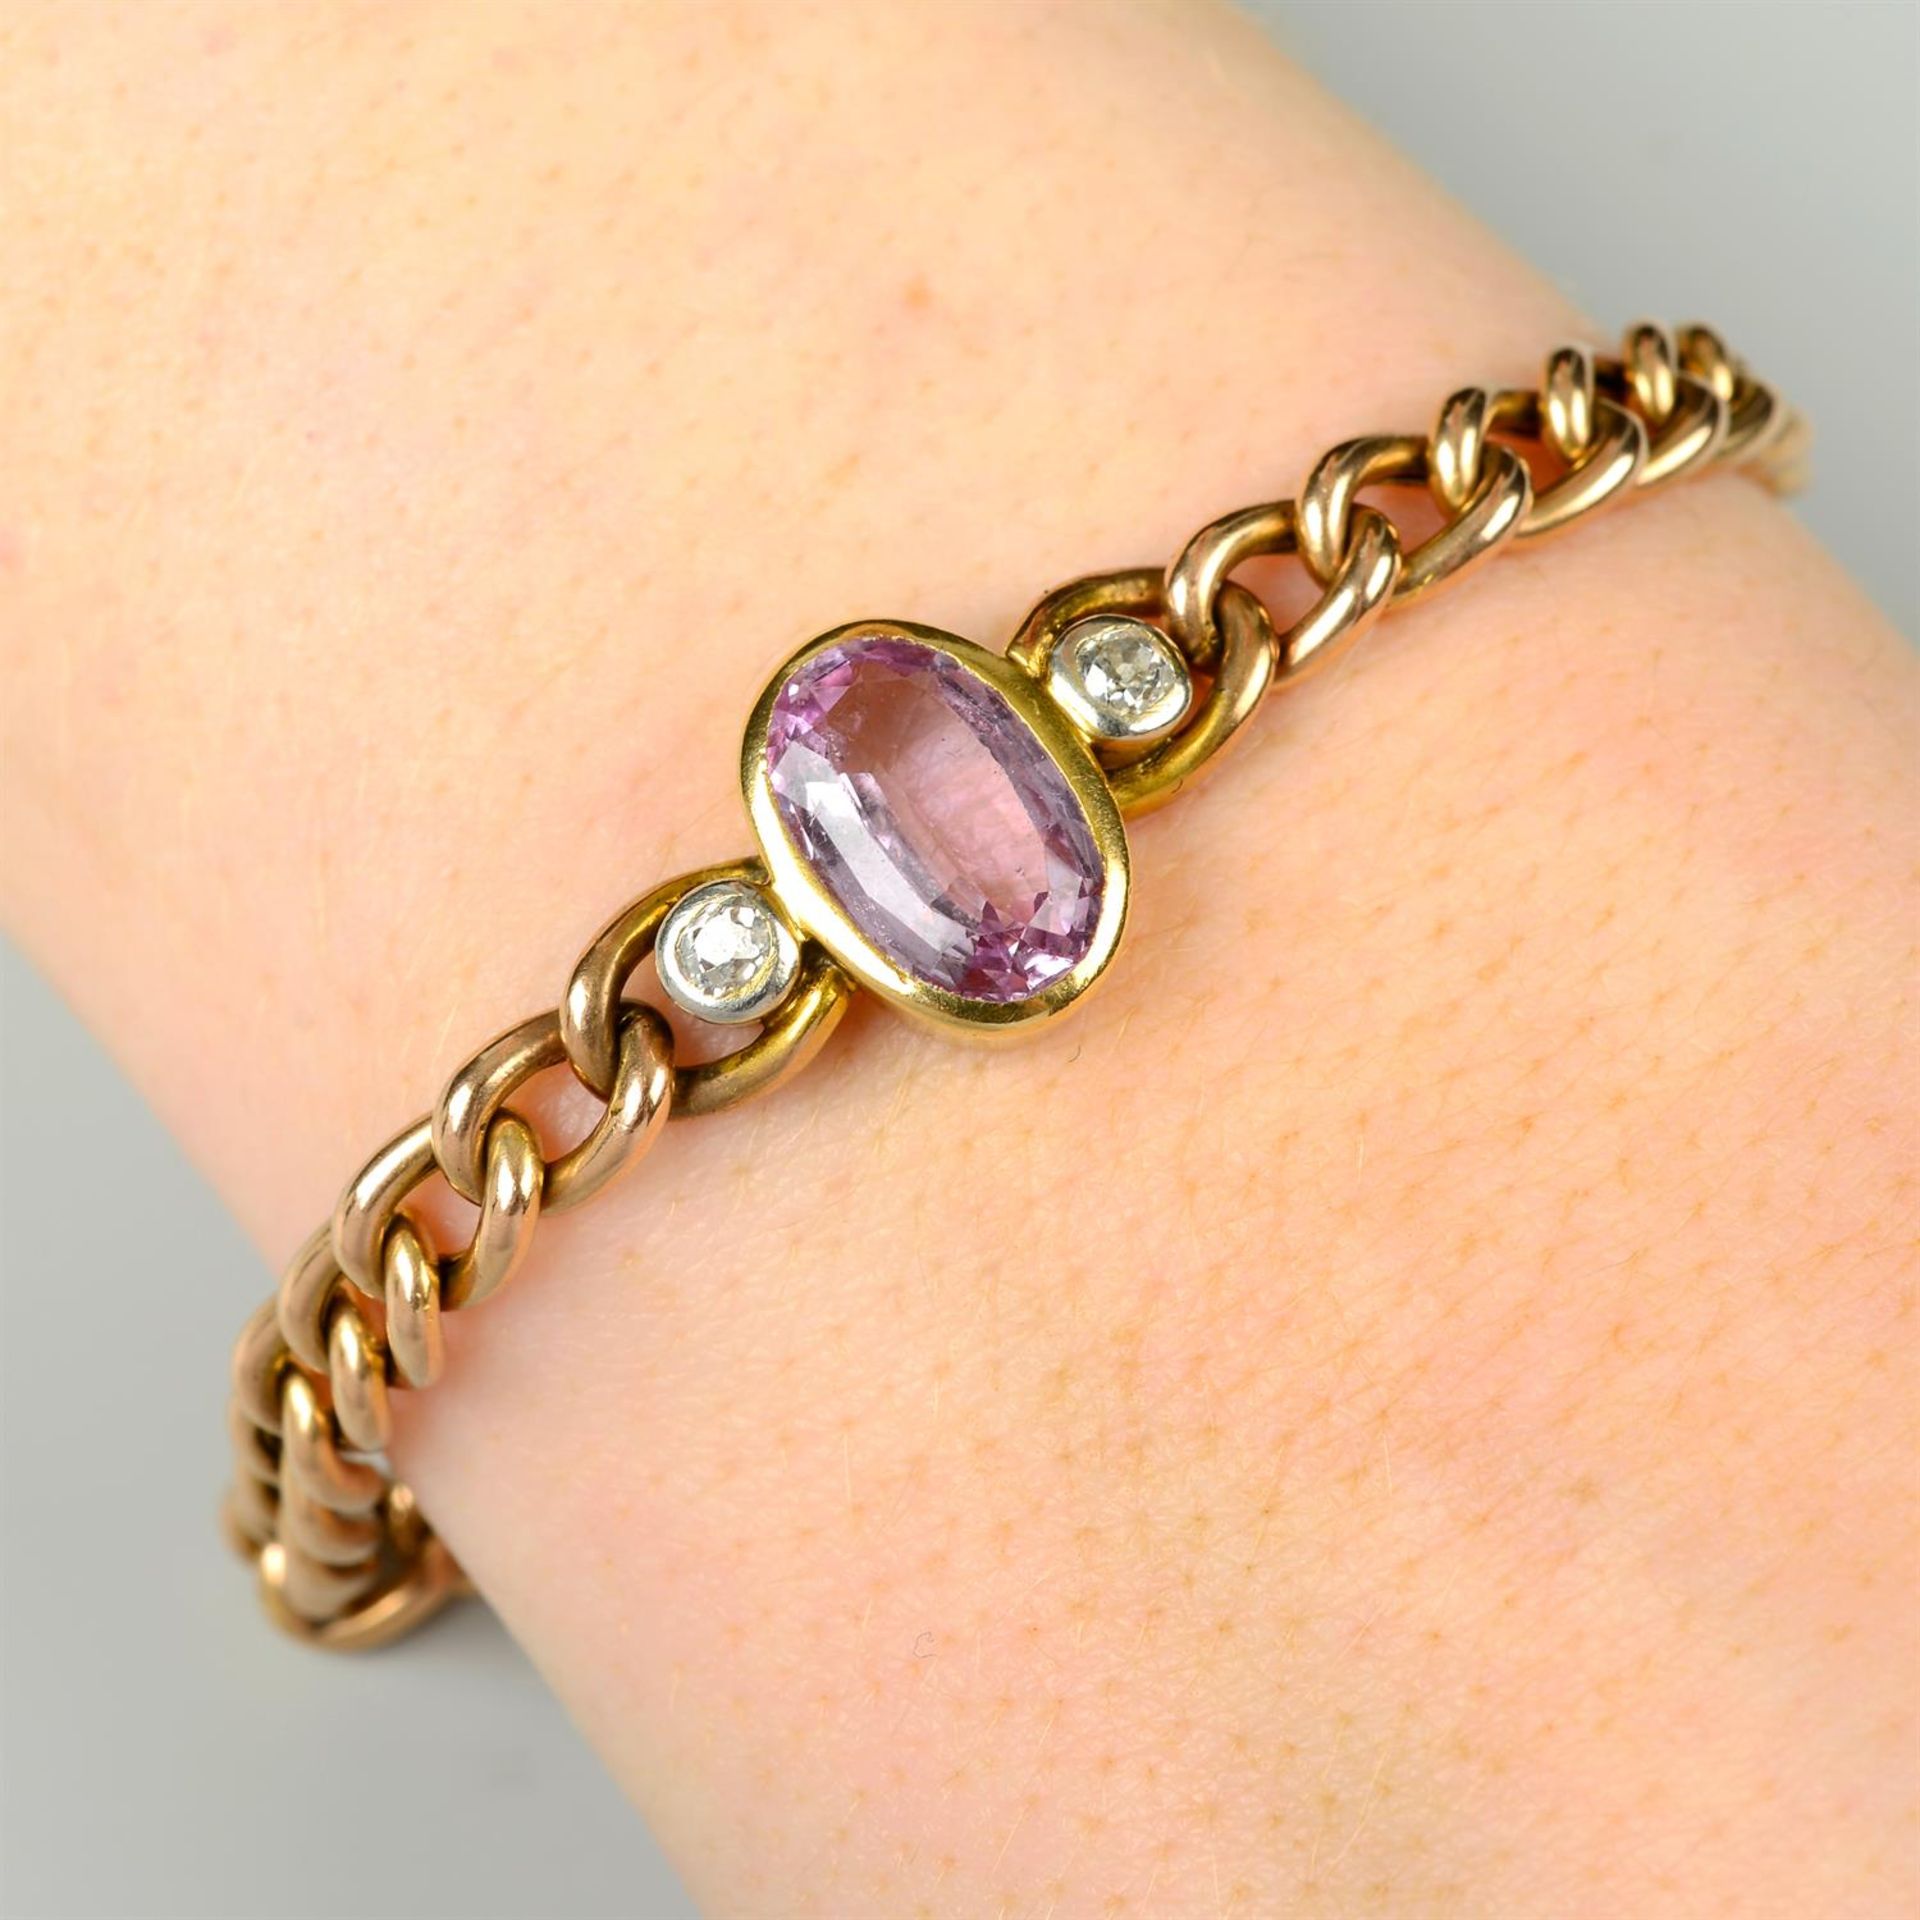 An early 20th century gold curb-link bracelet, with pink topaz and old-cut diamond sides inset.